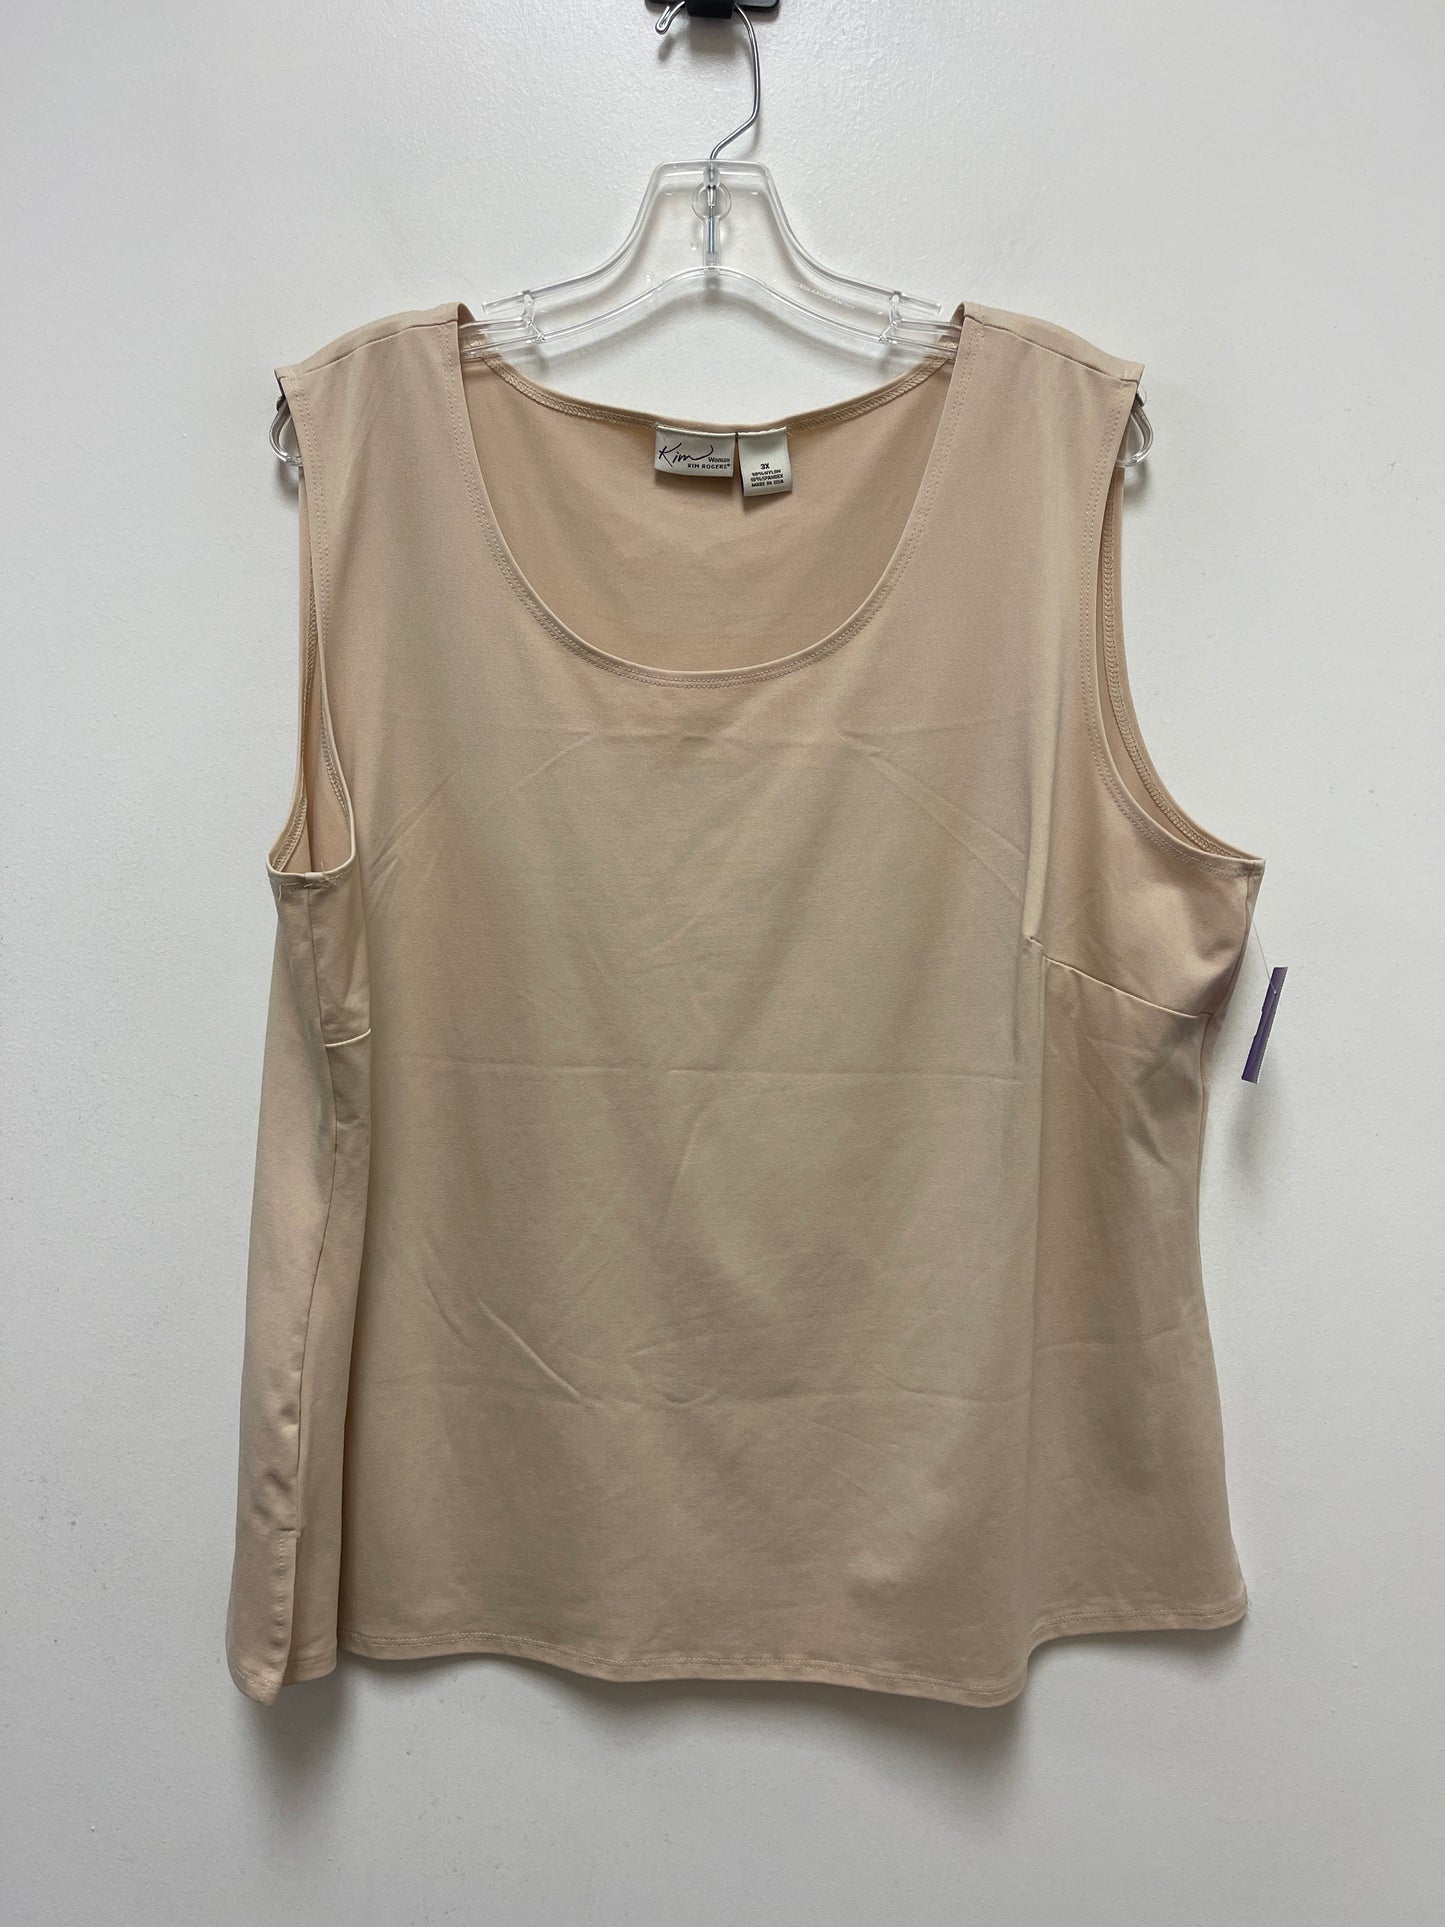 Top Sleeveless By Kim Rogers  Size: 3x